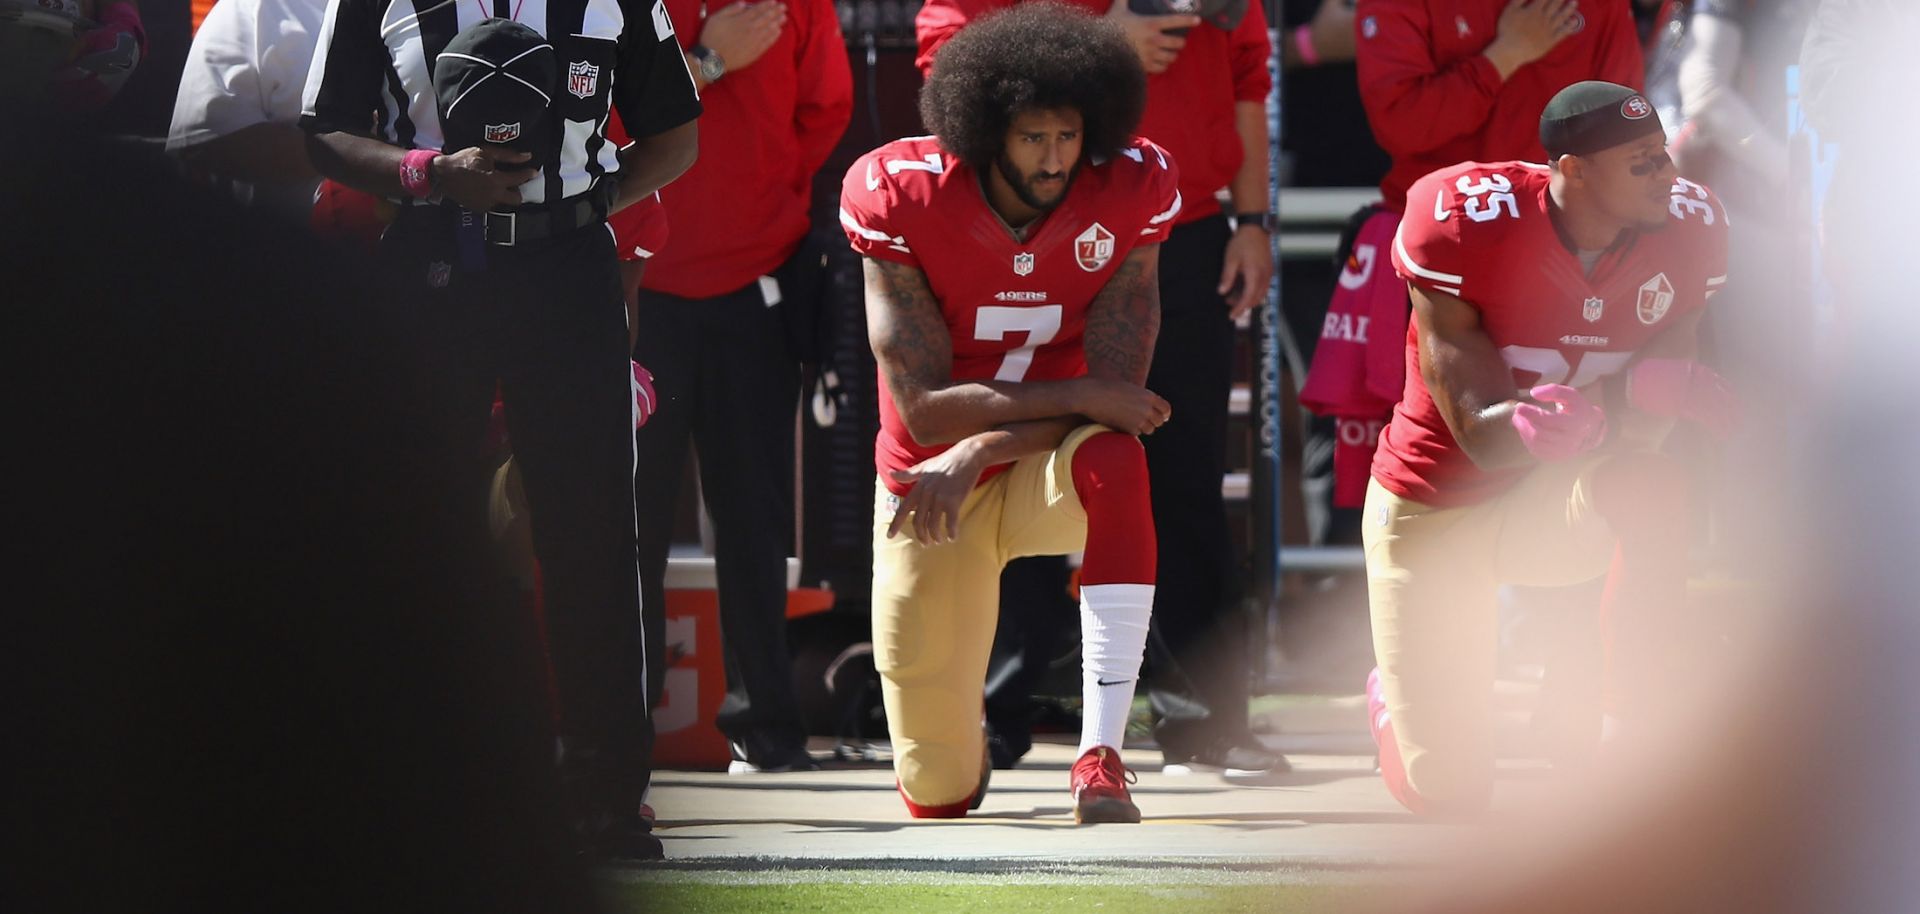 Quarterback Colin Kaepernick kneels during a protest during the playing of the national anthem before a San Francisco 49ers game in 2016.